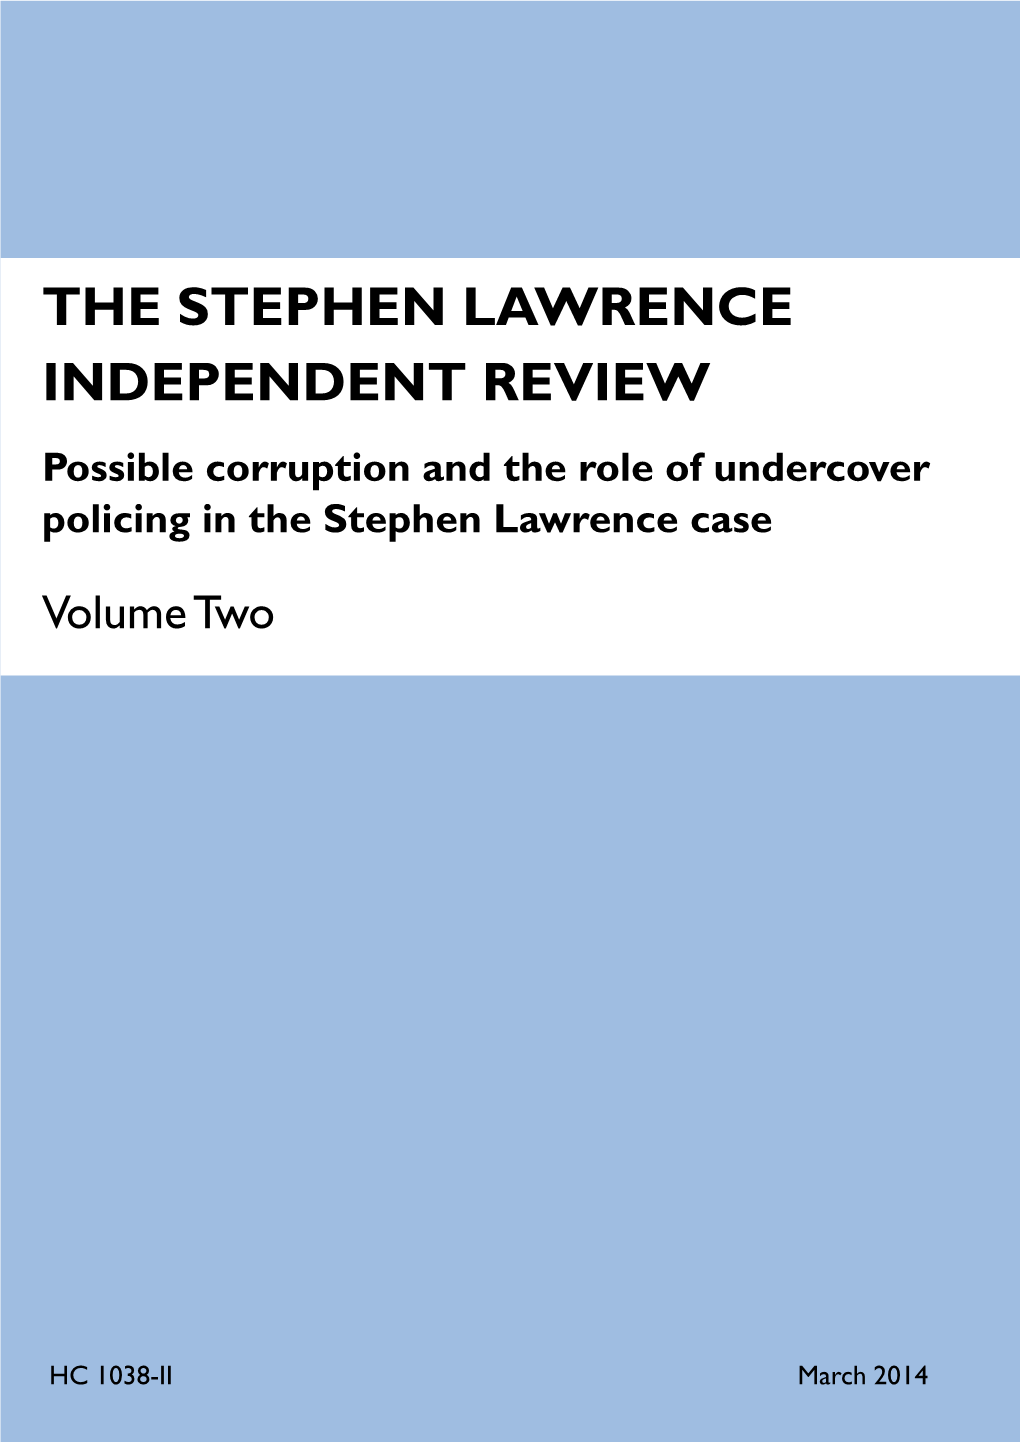 THE STEPHEN LAWRENCE INDEPENDENT REVIEW Possible Corruption and the Role of Undercover Policing in the Stephen Lawrence Case